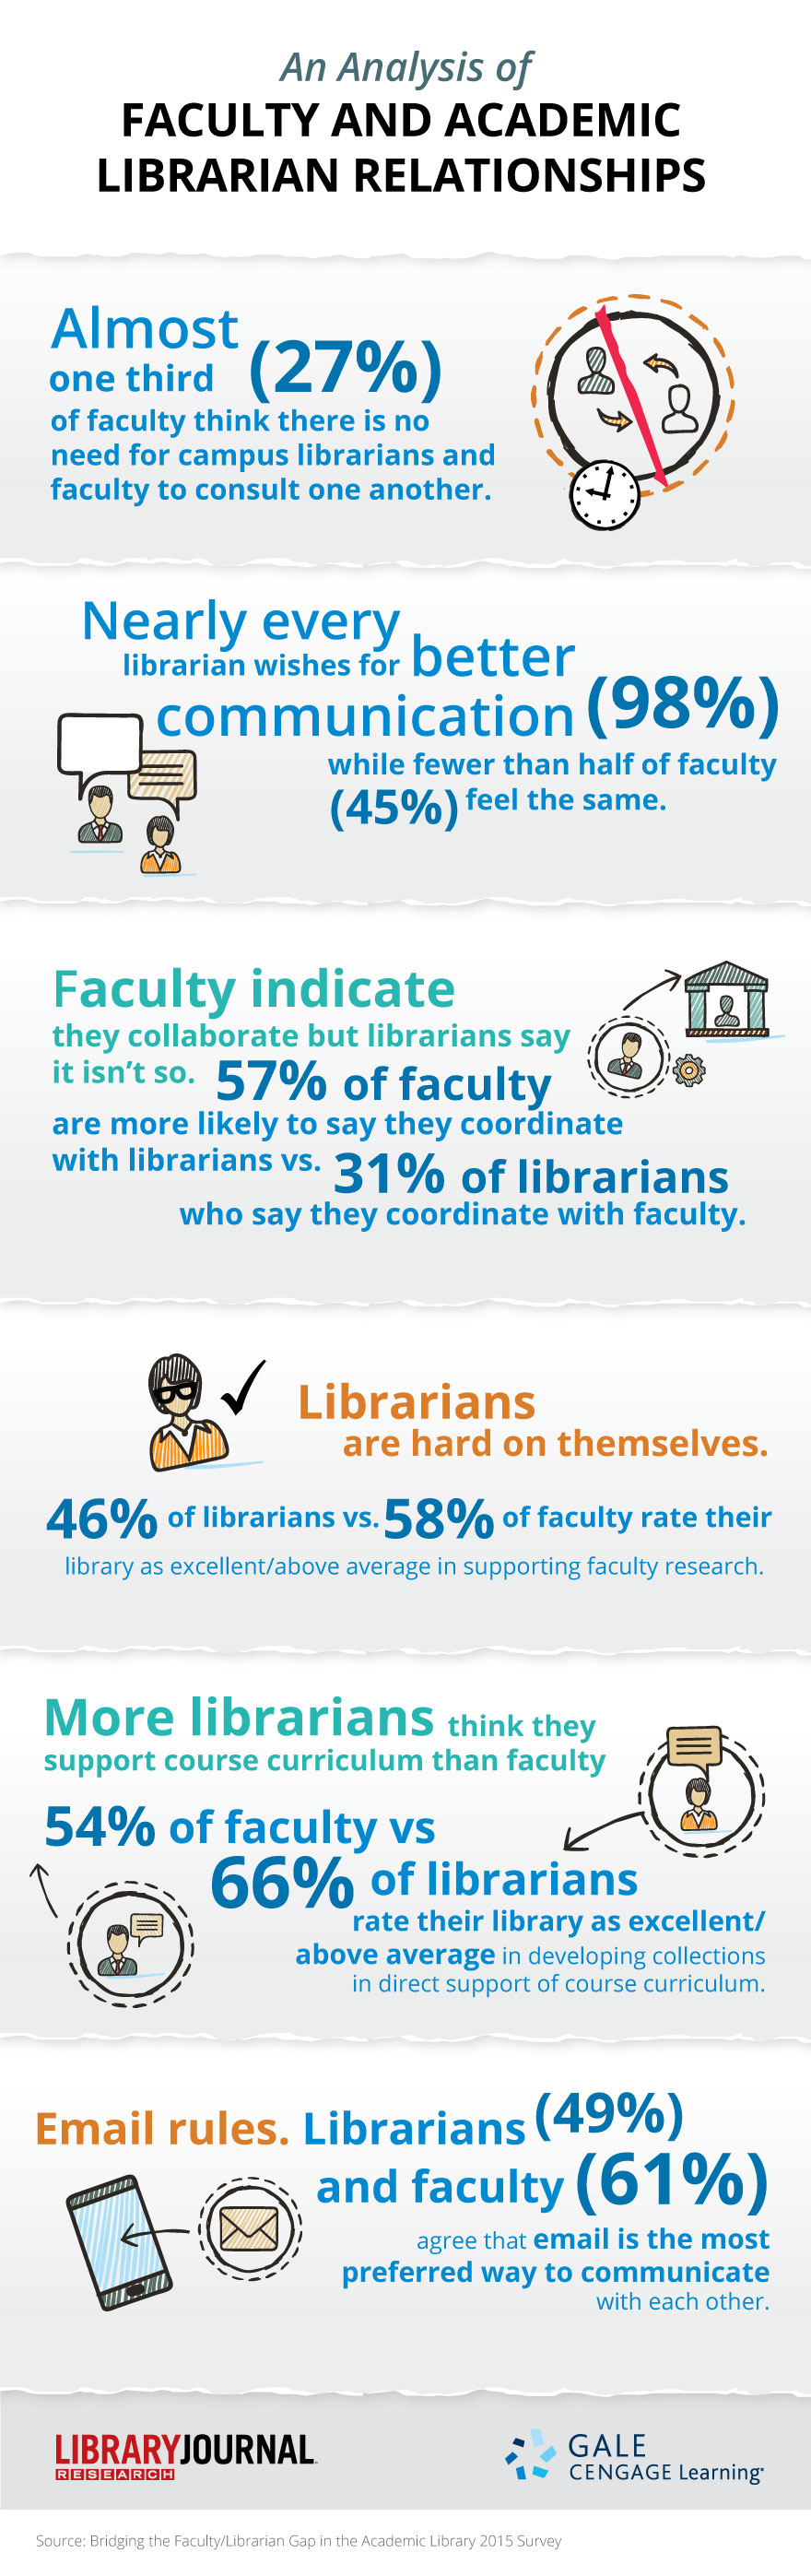 Analysis of Faculty and Academic Librarian Relationships